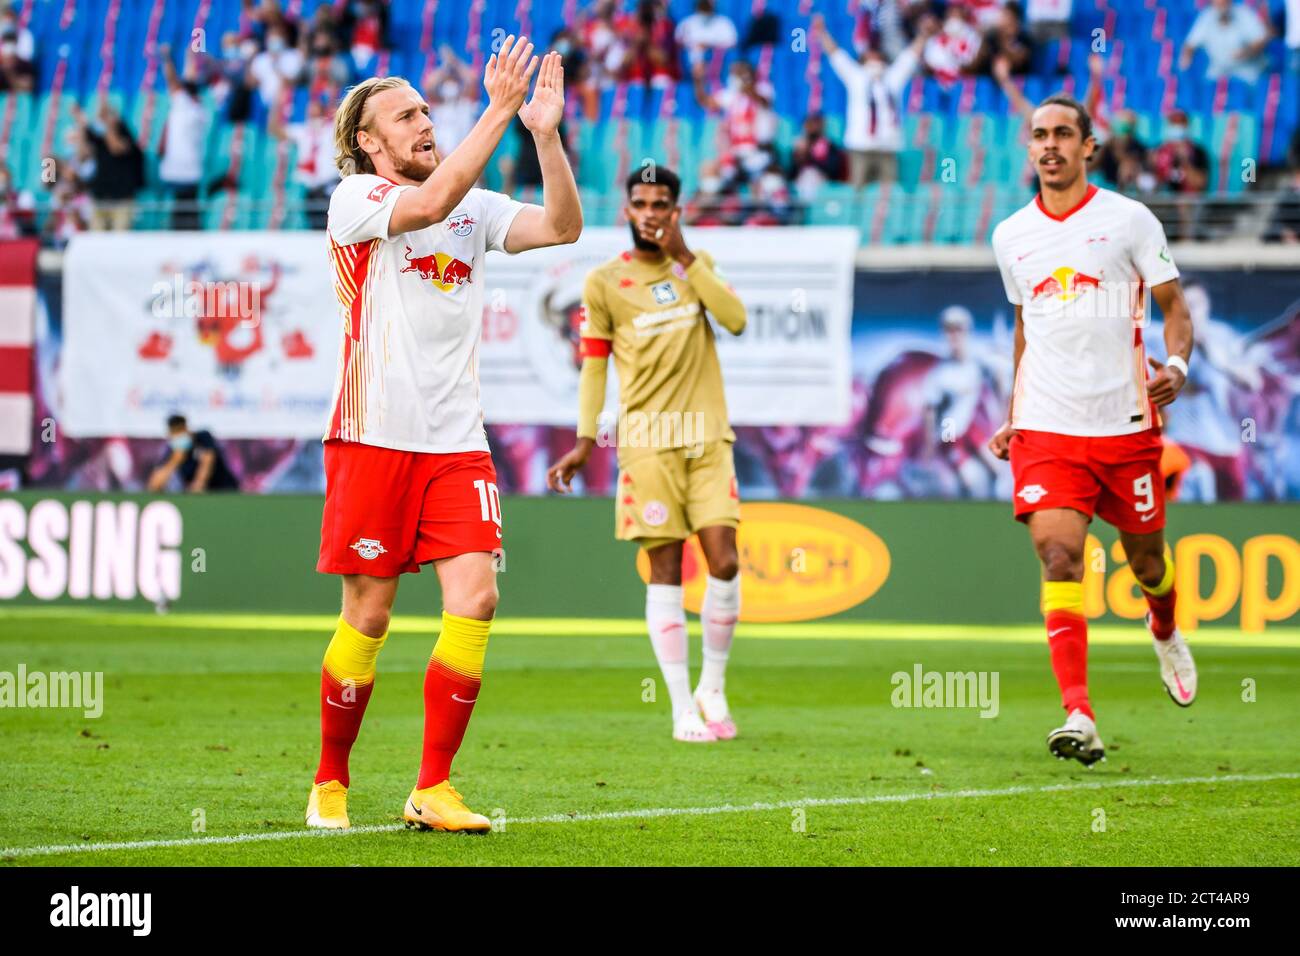 Leipzig, Germany. 20th Sep, 2020. Emil Forsberg (L) of Leipzig celebrates his scoring during a German Bundesliga match between RB Leipzig and 1.FSV Mainz 05 in Leipzig, Germany, Sept. 20, 2020. Credit: Kevin Voigt/Xinhua/Alamy Live News Stock Photo